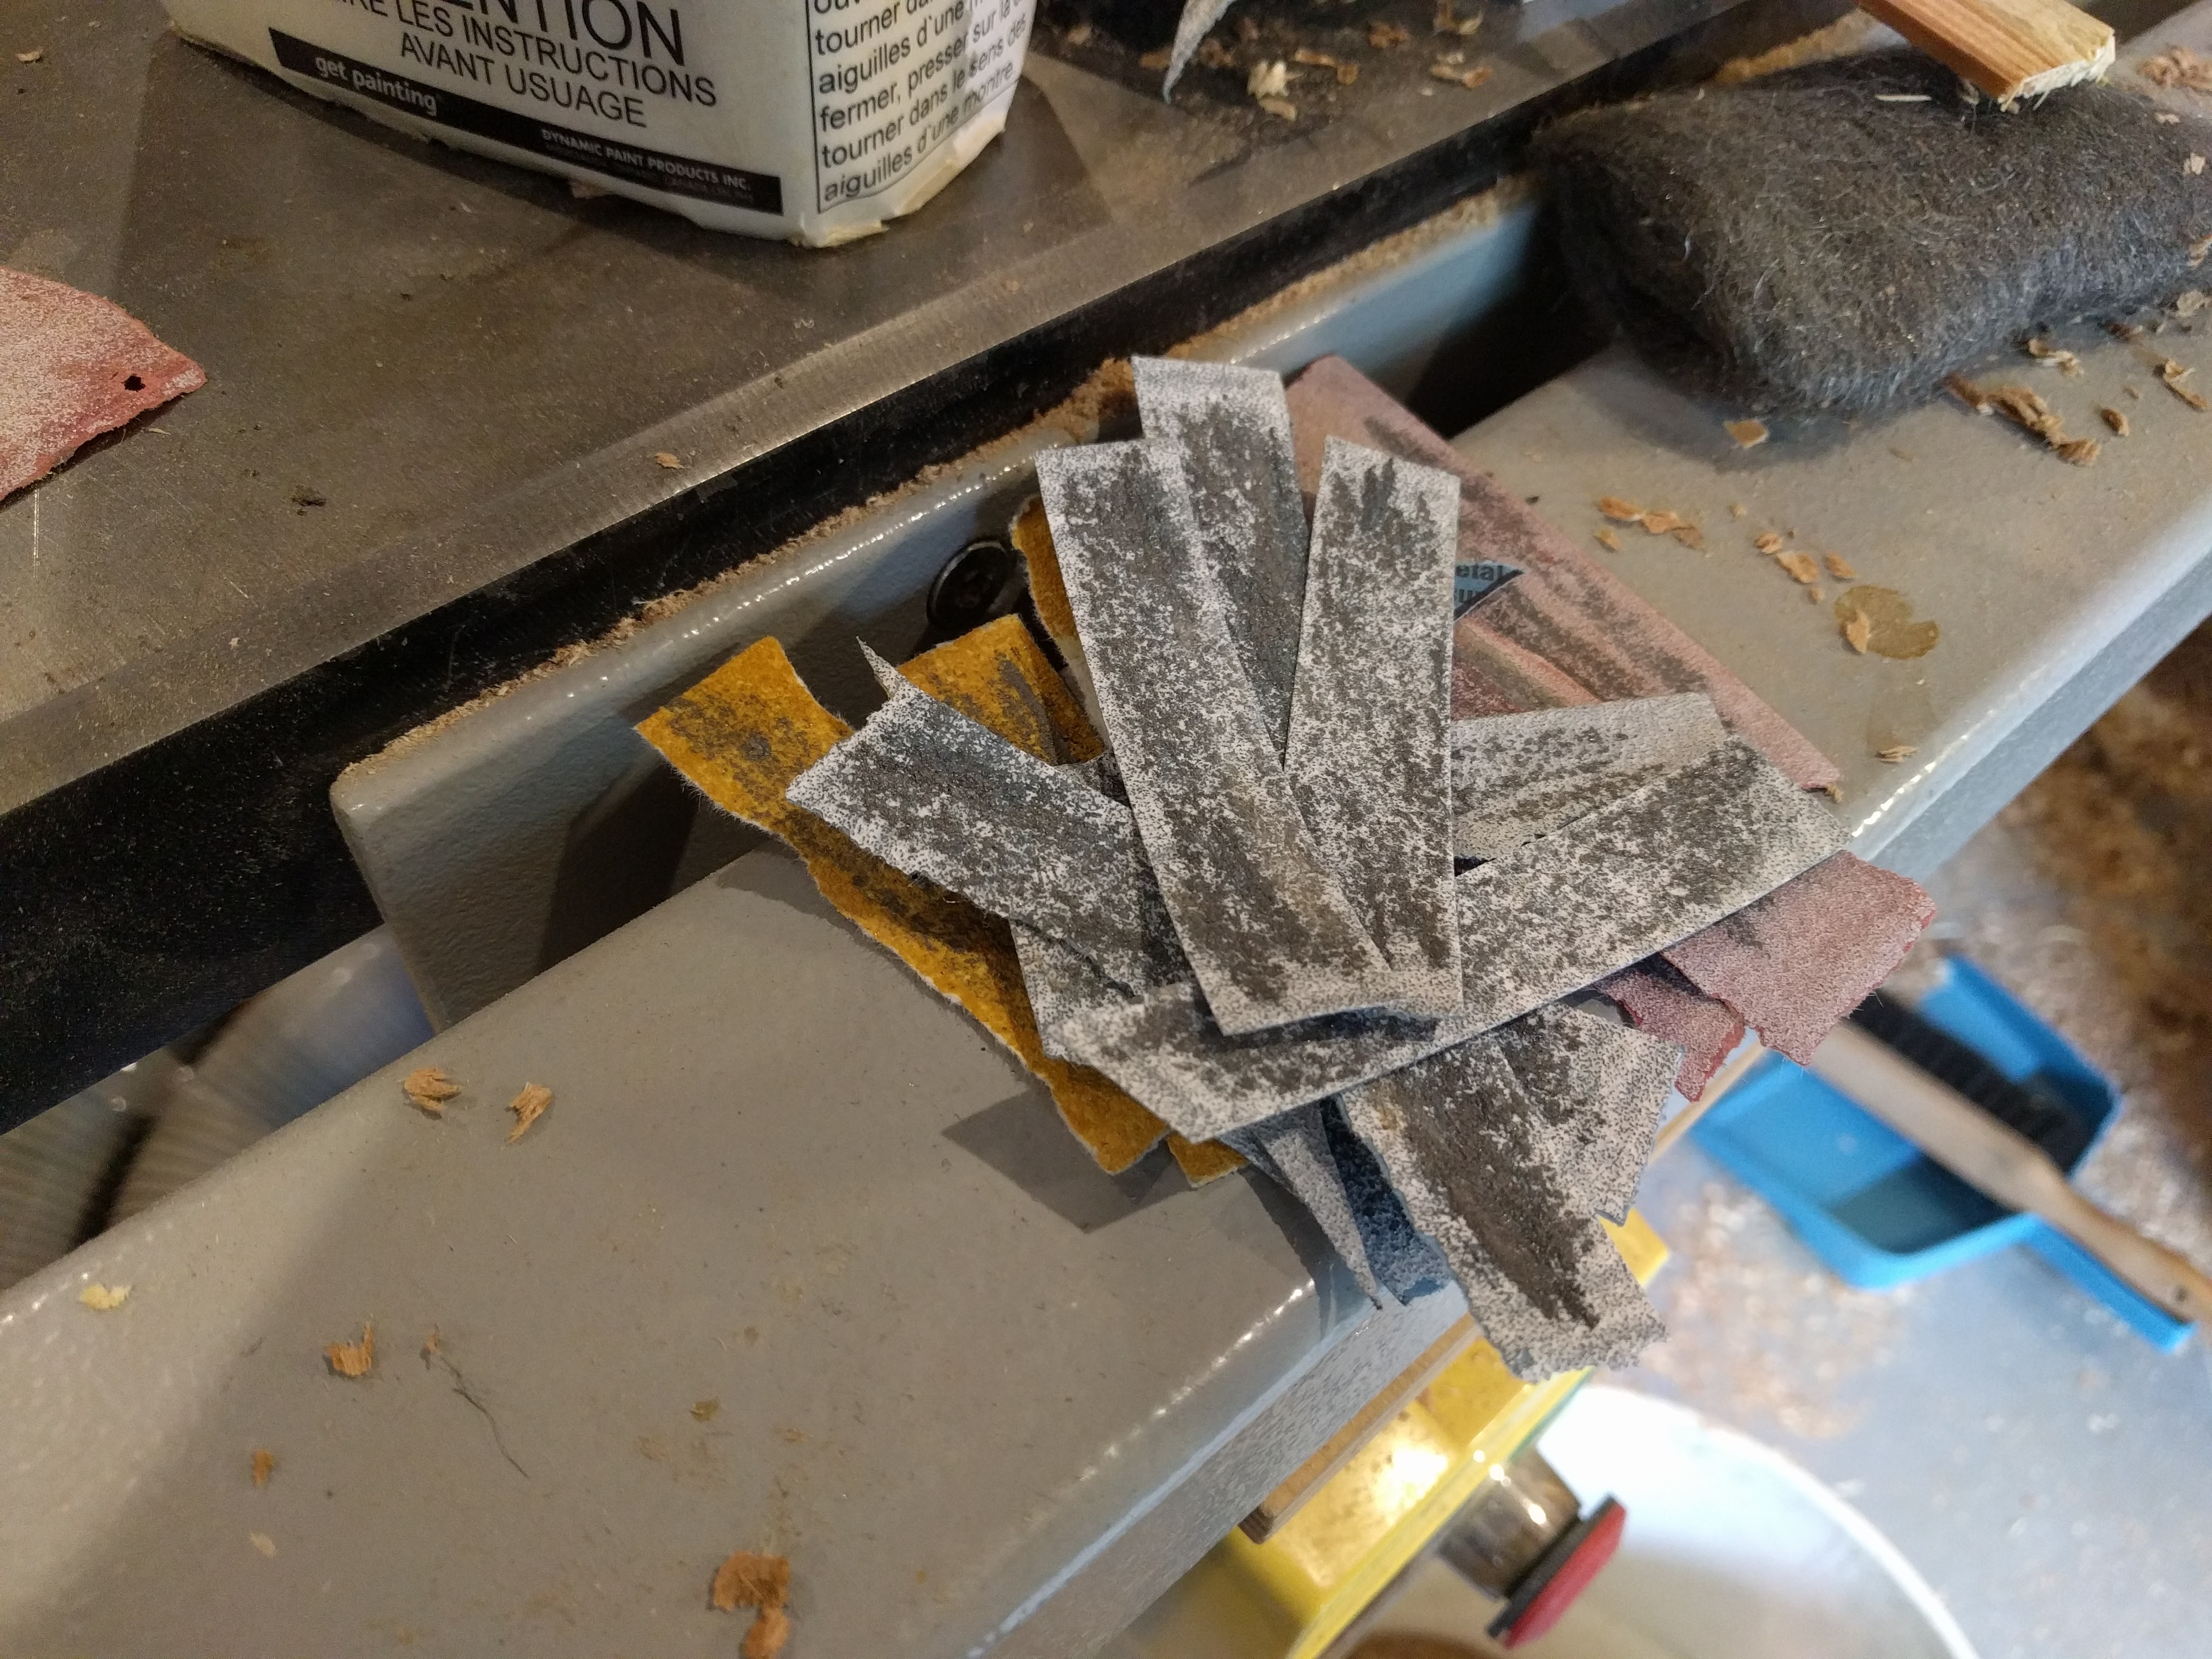 Sandpaper strips used to shape the stainless steel part.